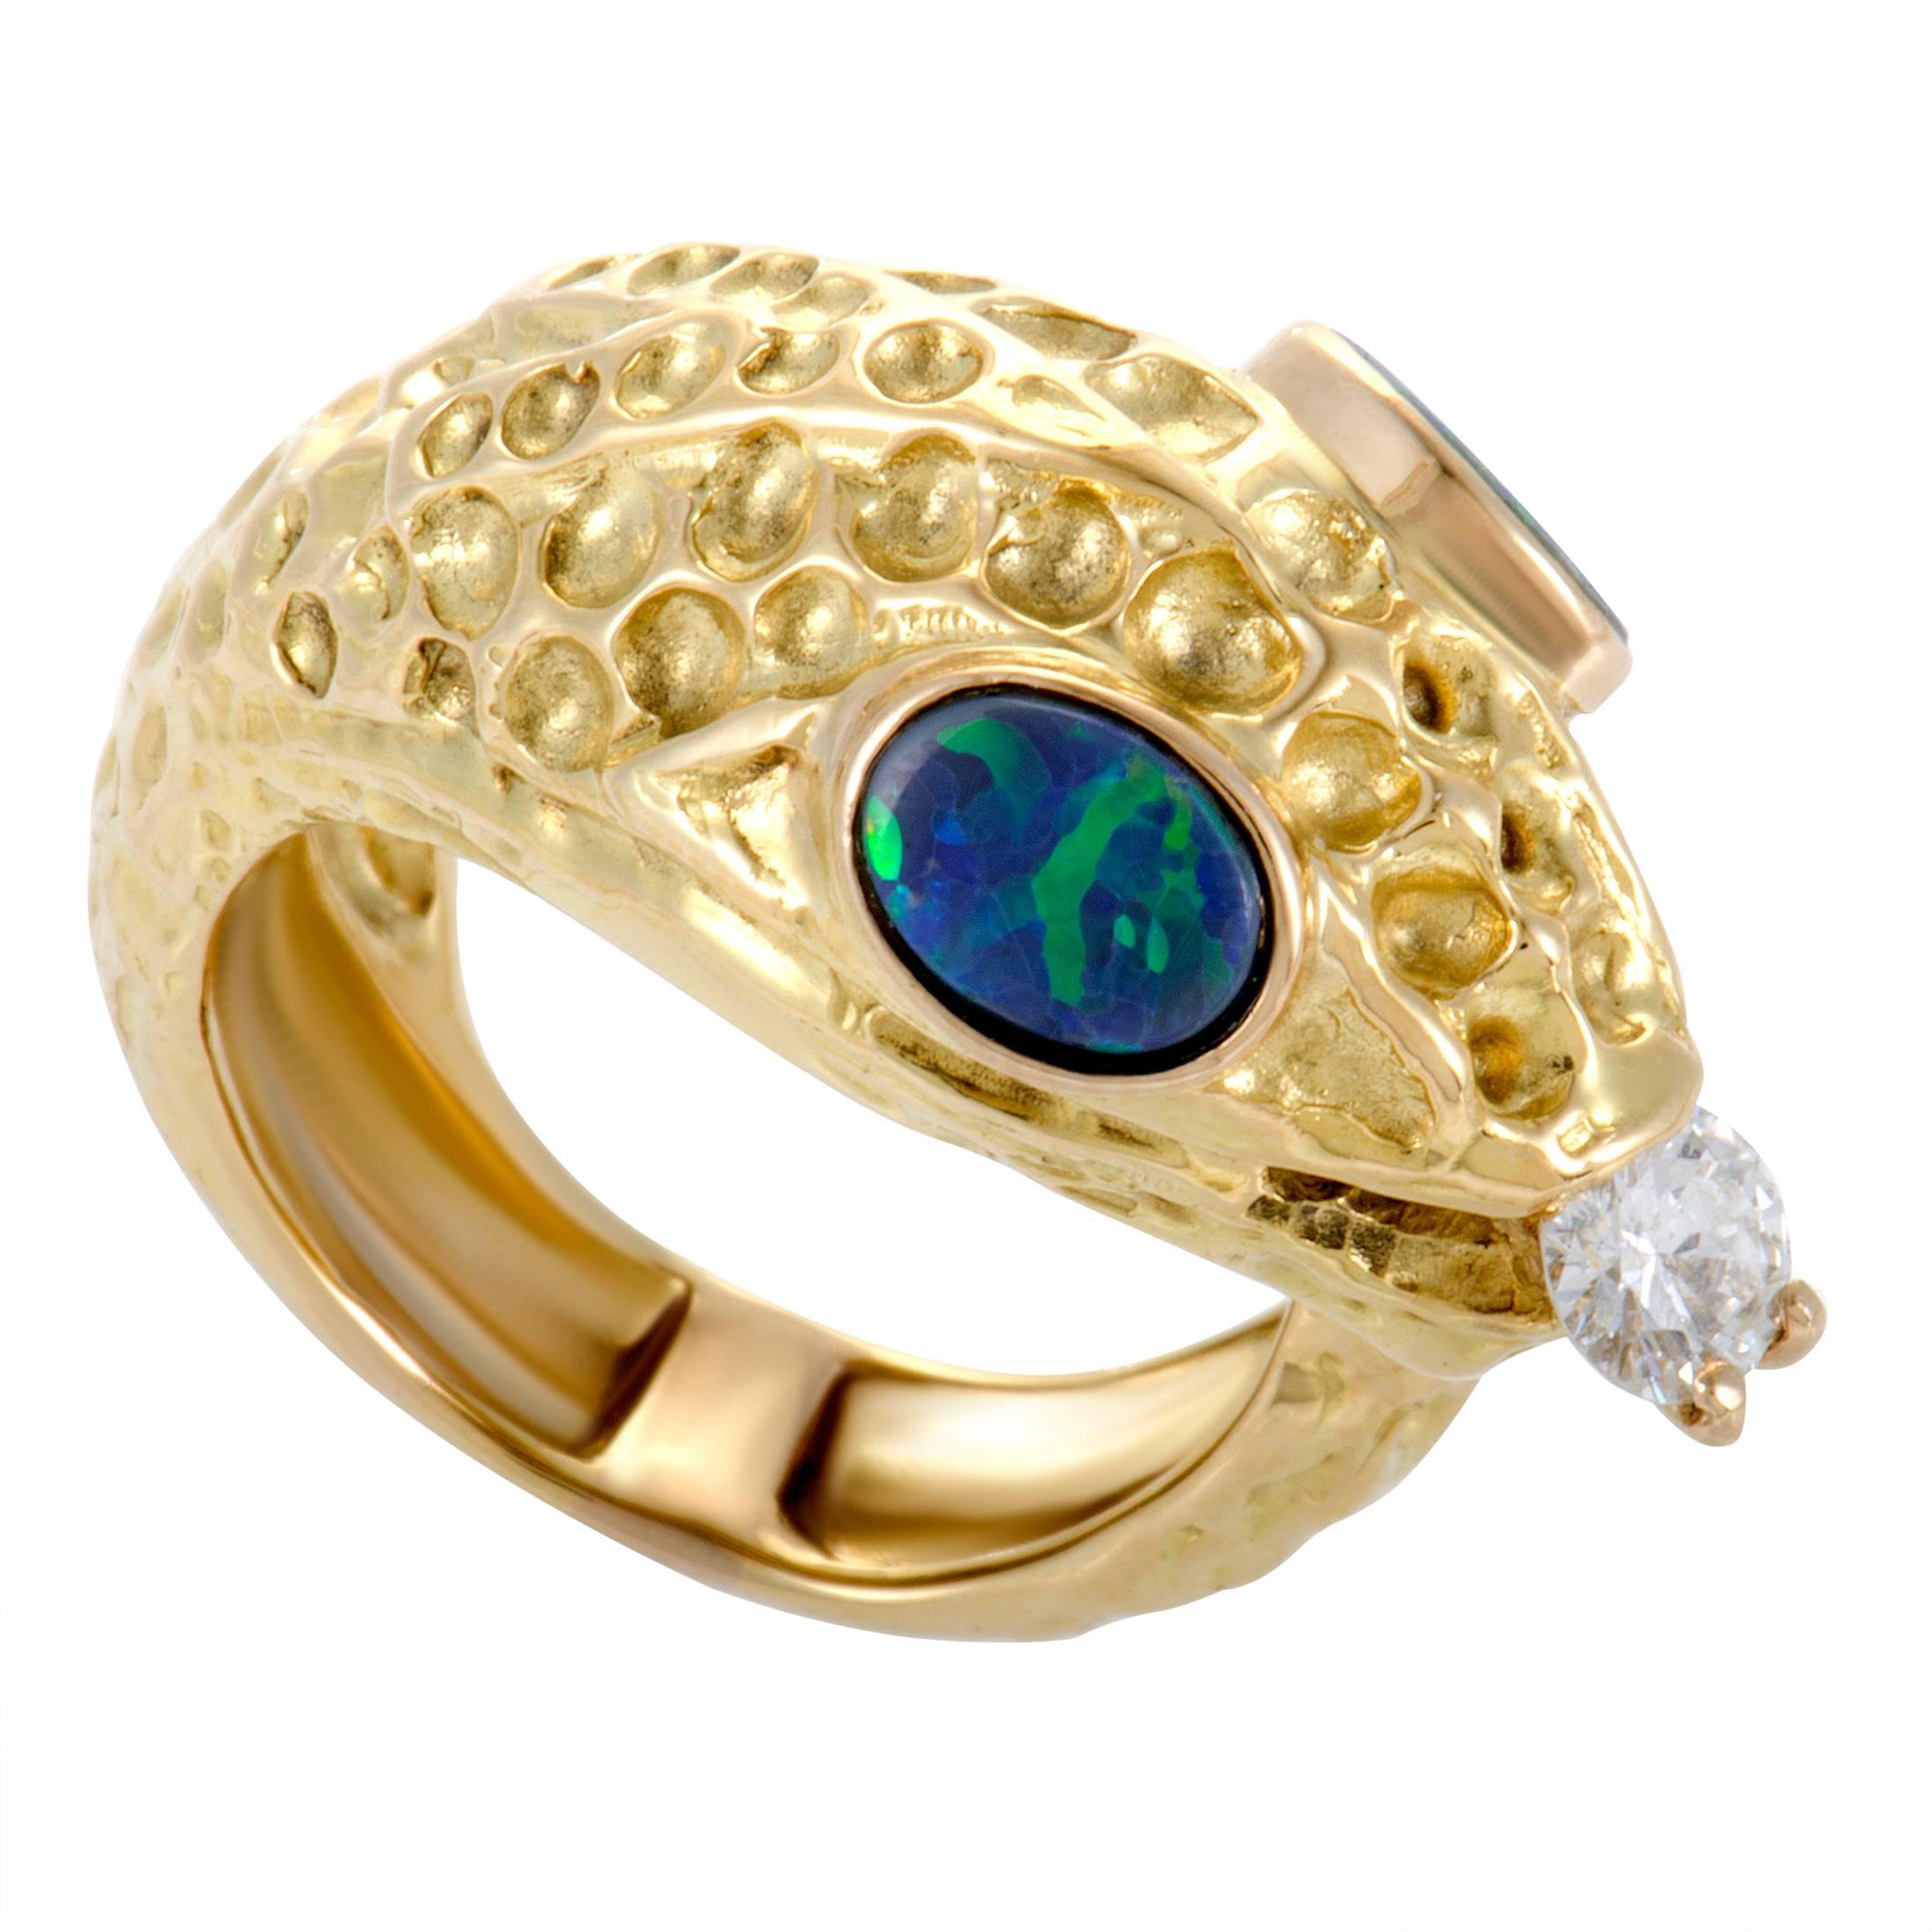 Magnificently depicting a snake, an animal that’s had many meanings throughout history - from rebirth to guardianship, this fascinating ring offers an exceptionally compelling appearance. The ring is made of 18K yellow gold and it is embellished